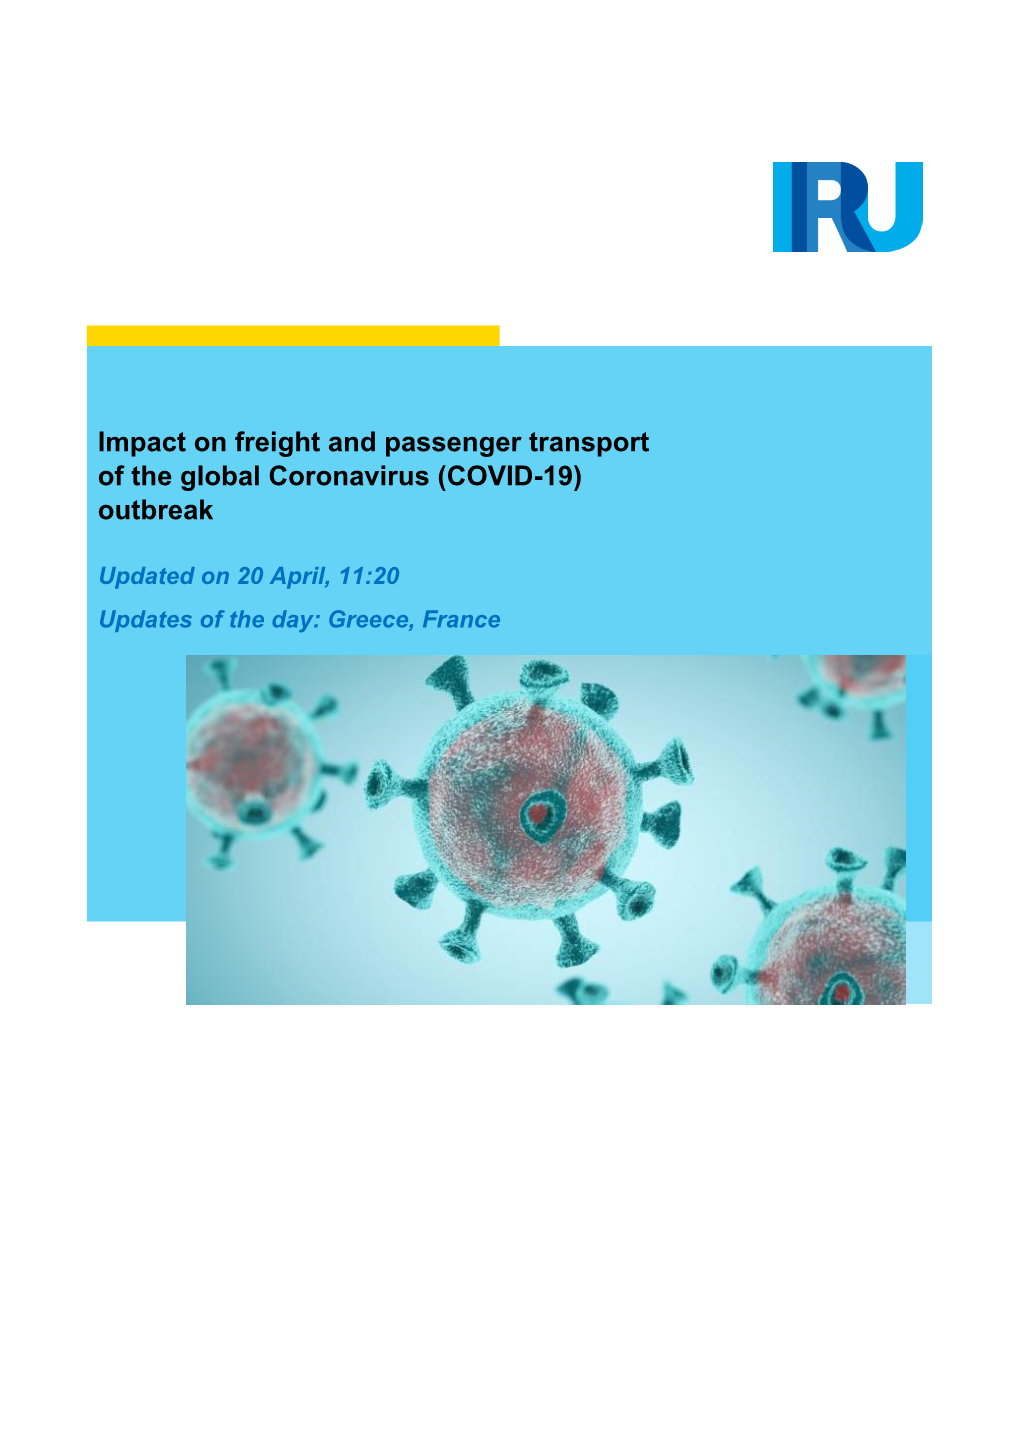 Impact on Freight and Passenger Transport of the Global Coronavirus (COVID-19) Outbreak